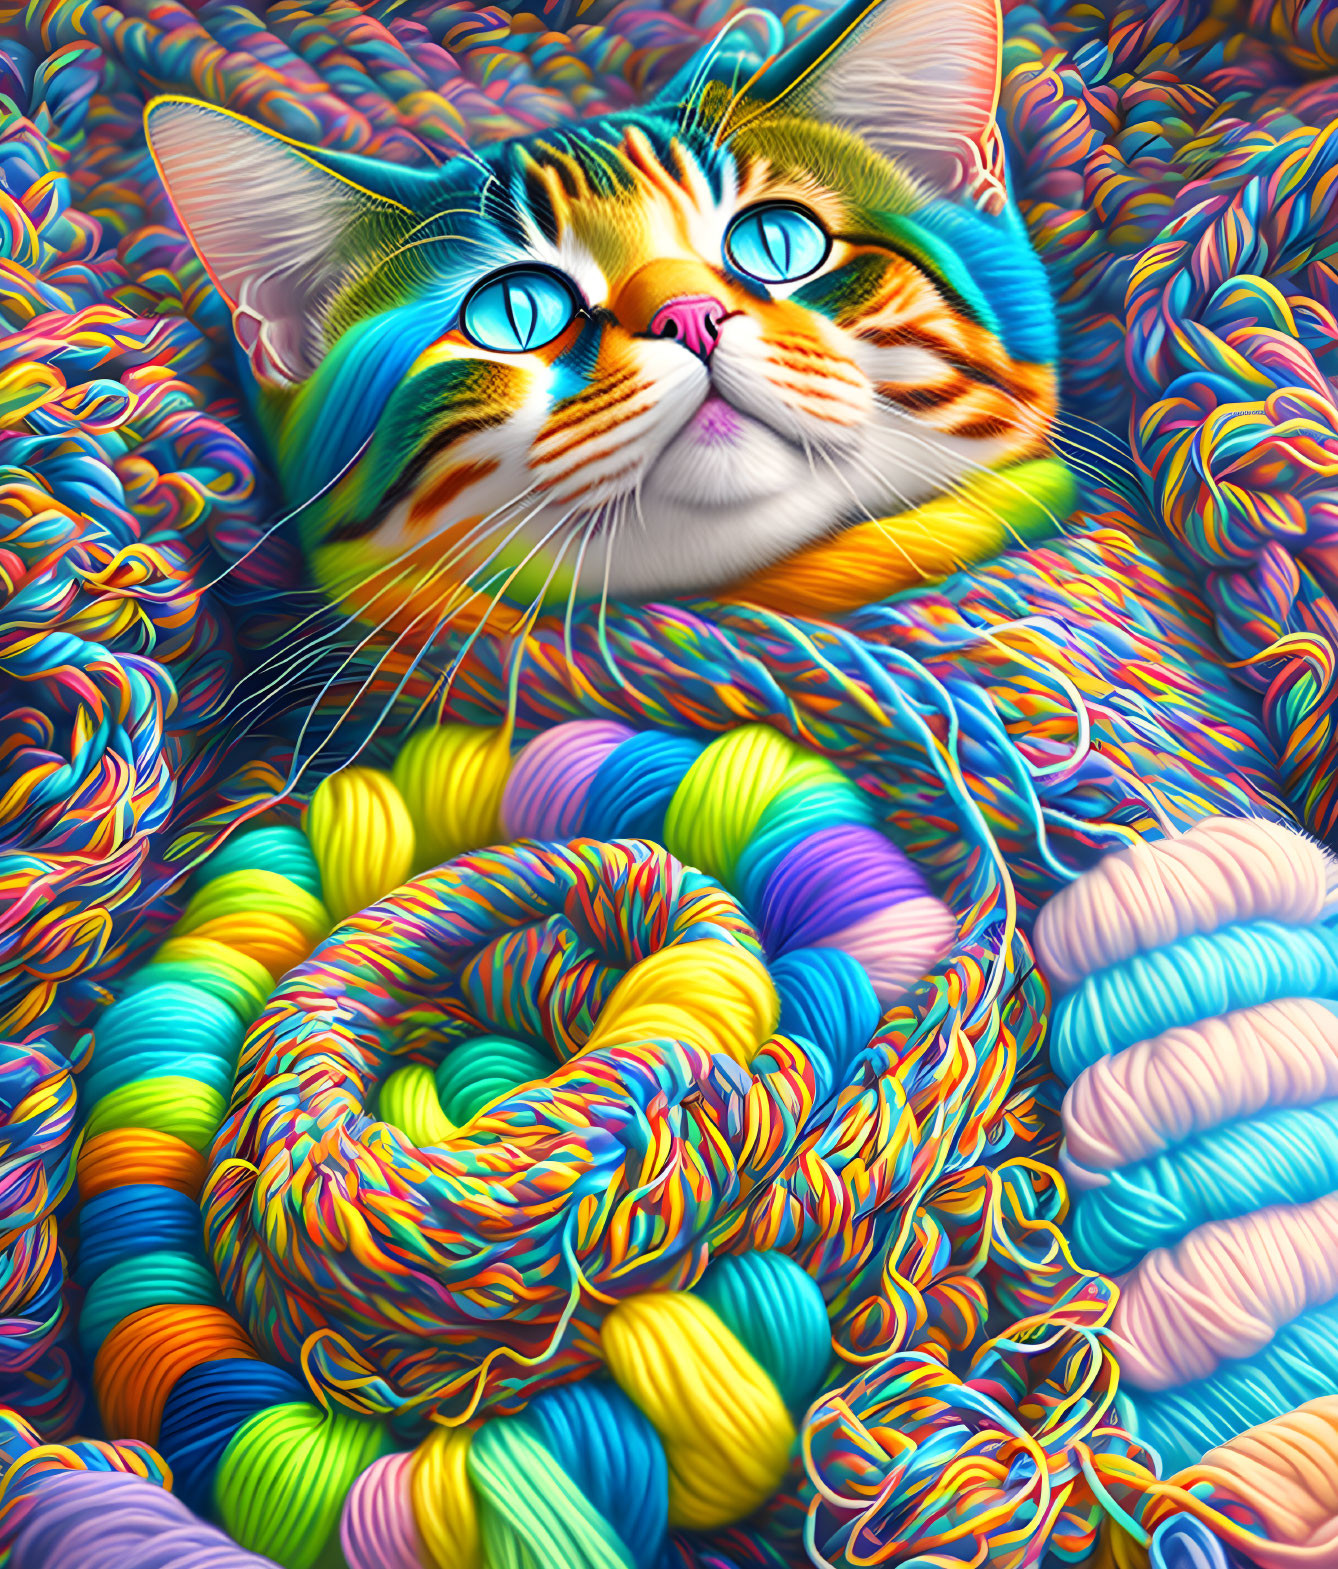 Whimsical cat face illustration with blue eyes in colorful yarn sea